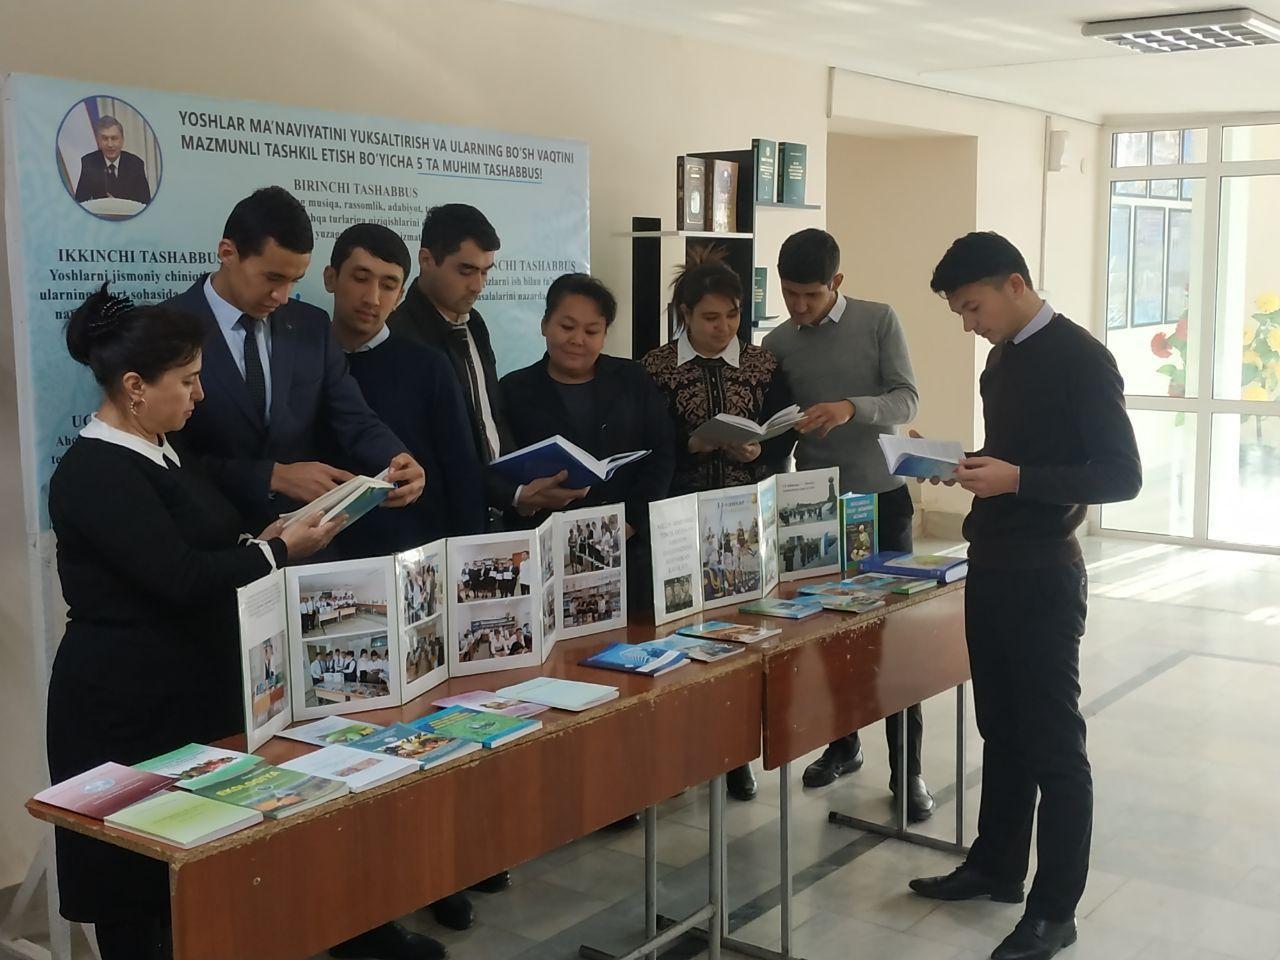 The Faculty of Chemical Technology hosted the event under the motto 